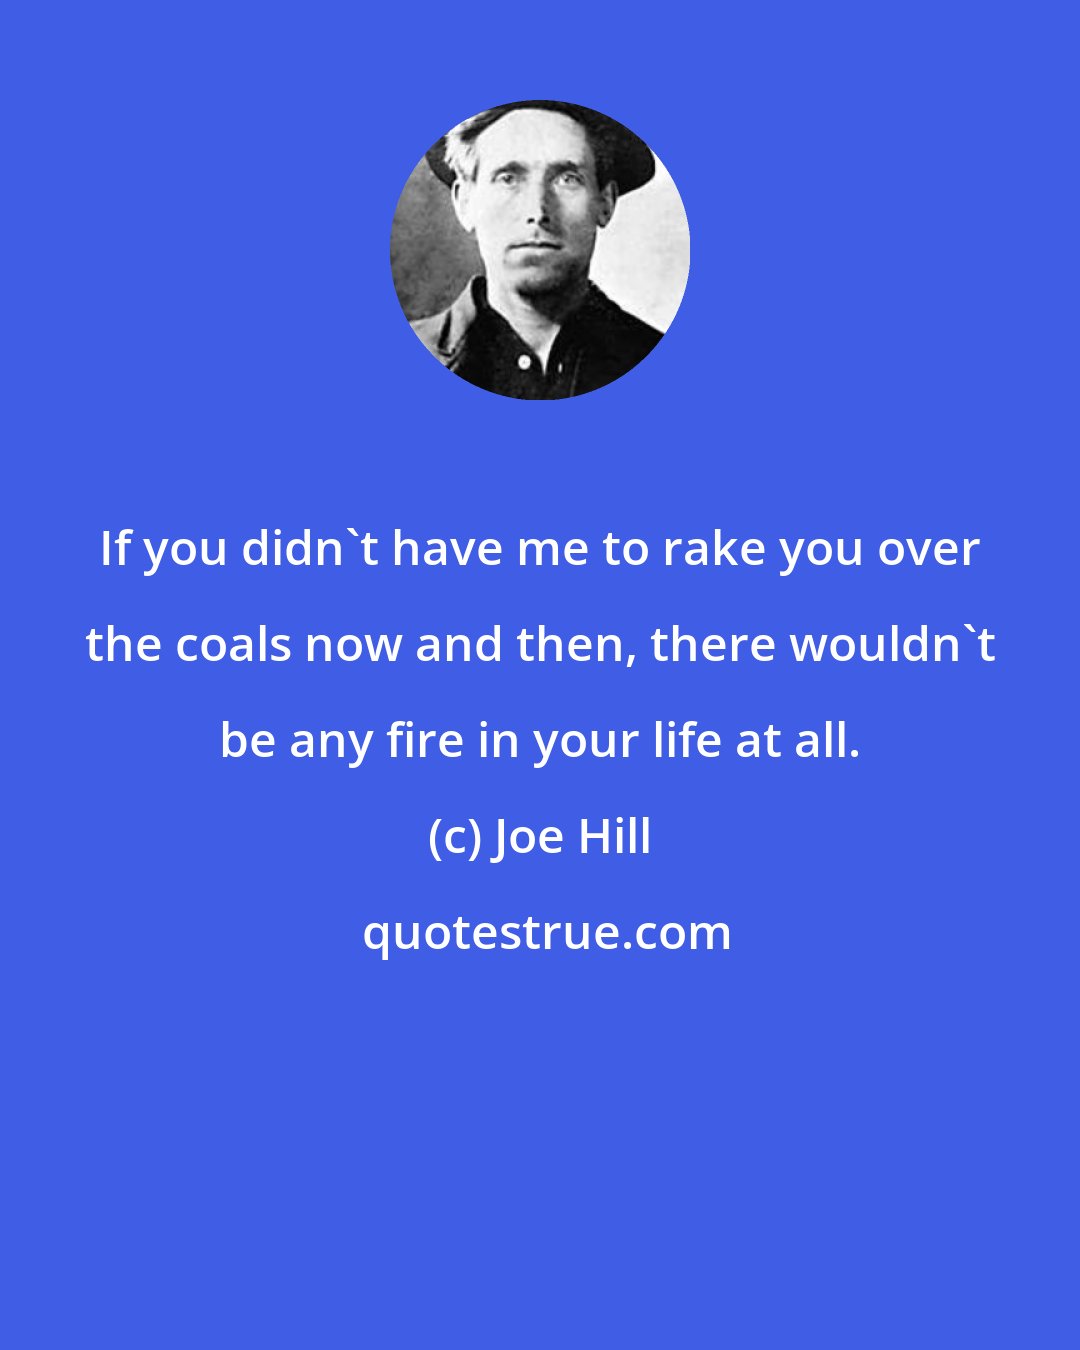 Joe Hill: If you didn't have me to rake you over the coals now and then, there wouldn't be any fire in your life at all.